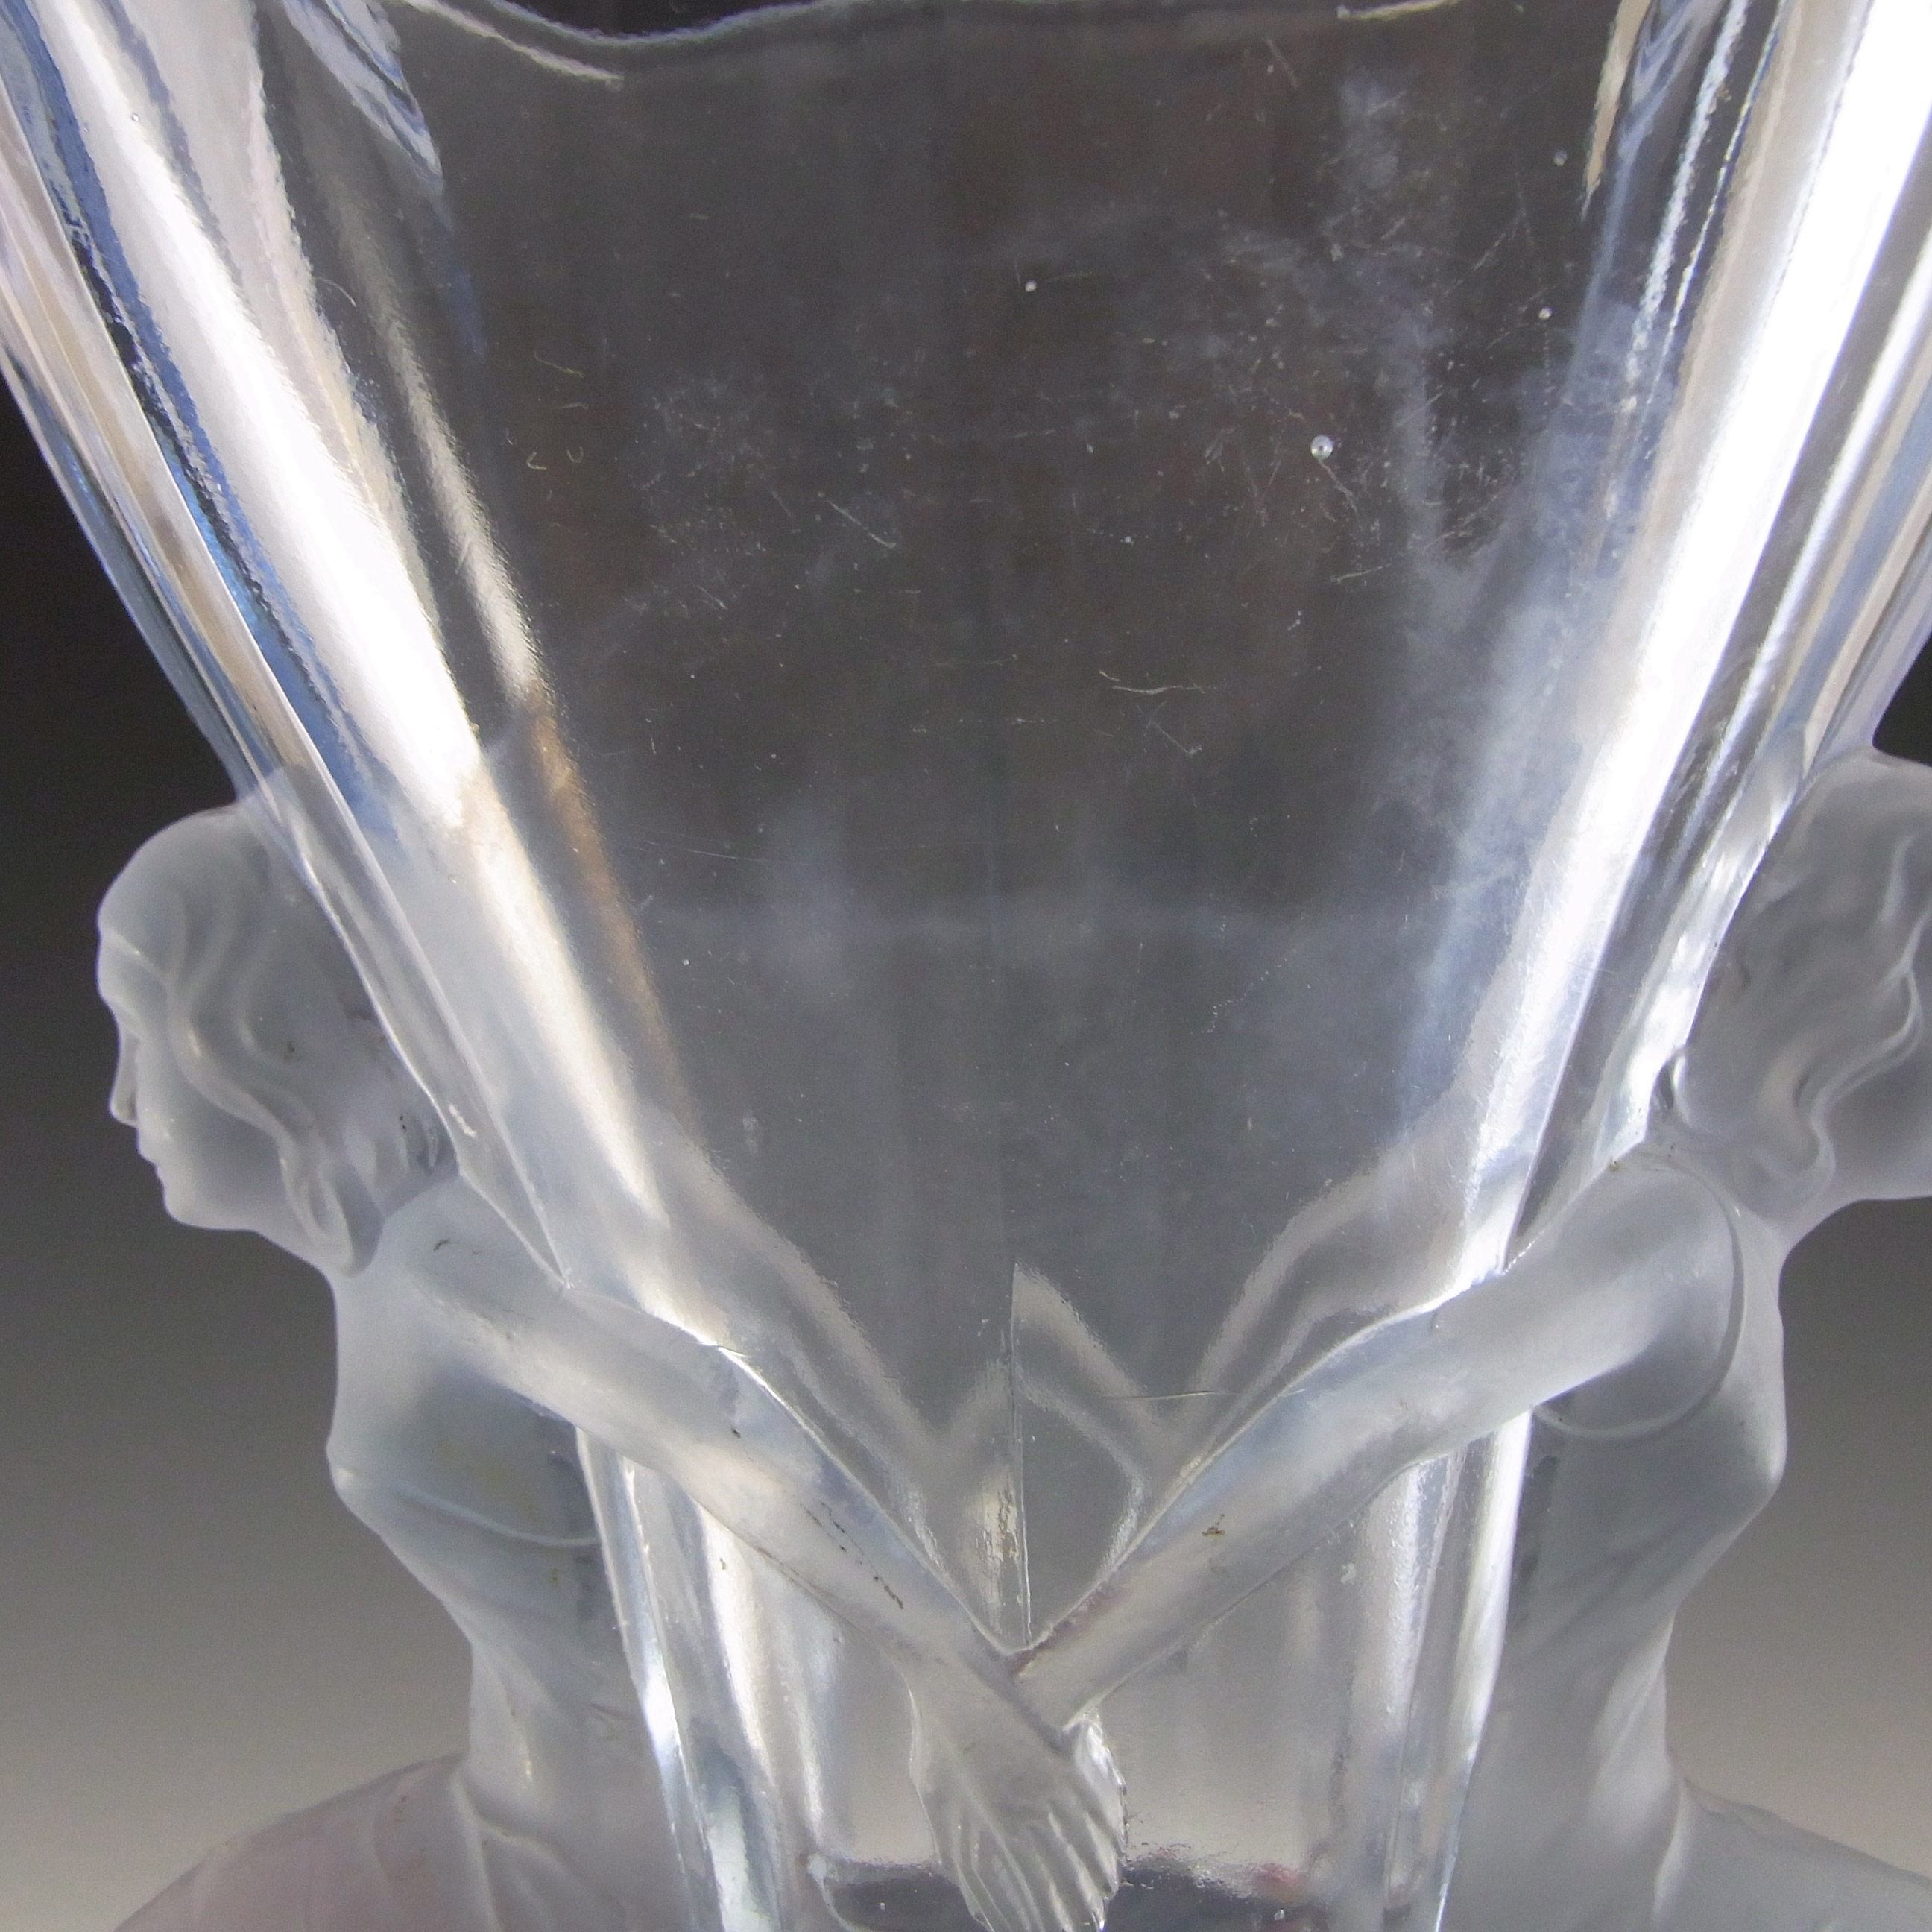 Walther & Söhne 1930's Art Deco Blue Glass 'Windsor' Vase - Click Image to Close